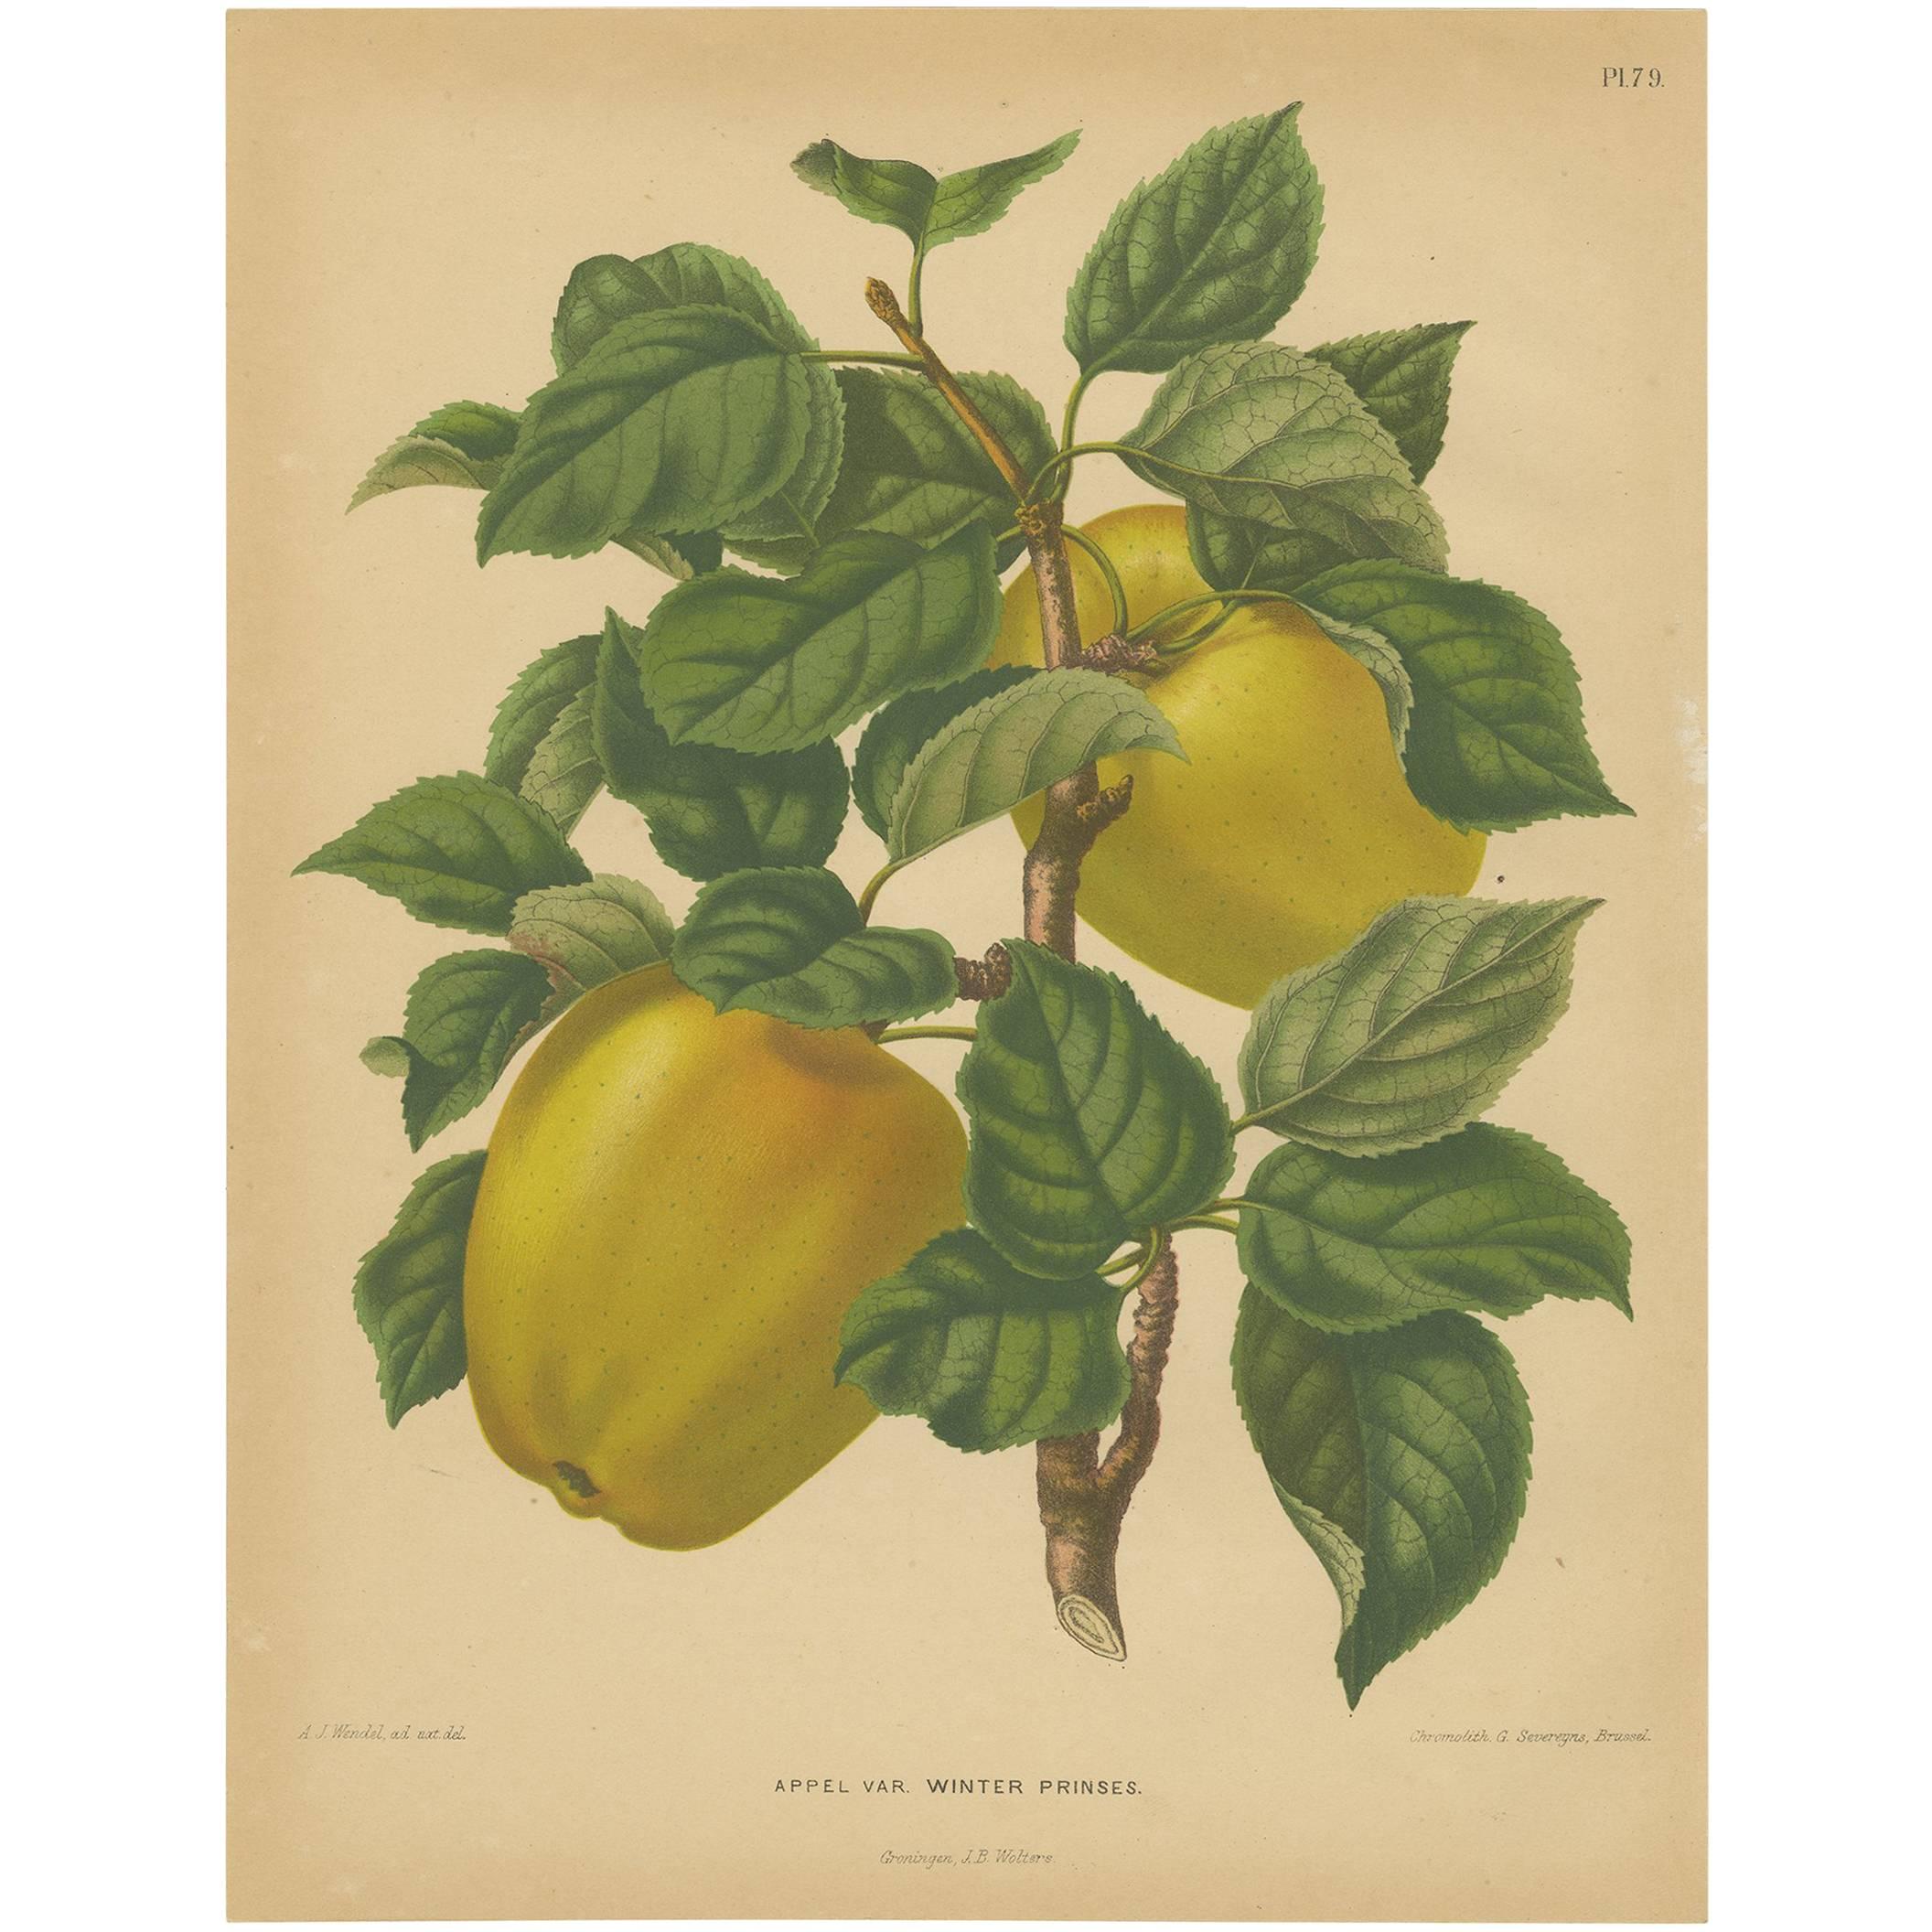 Antique Print of the Winter Princess Apple by G. Severeyns, 1876